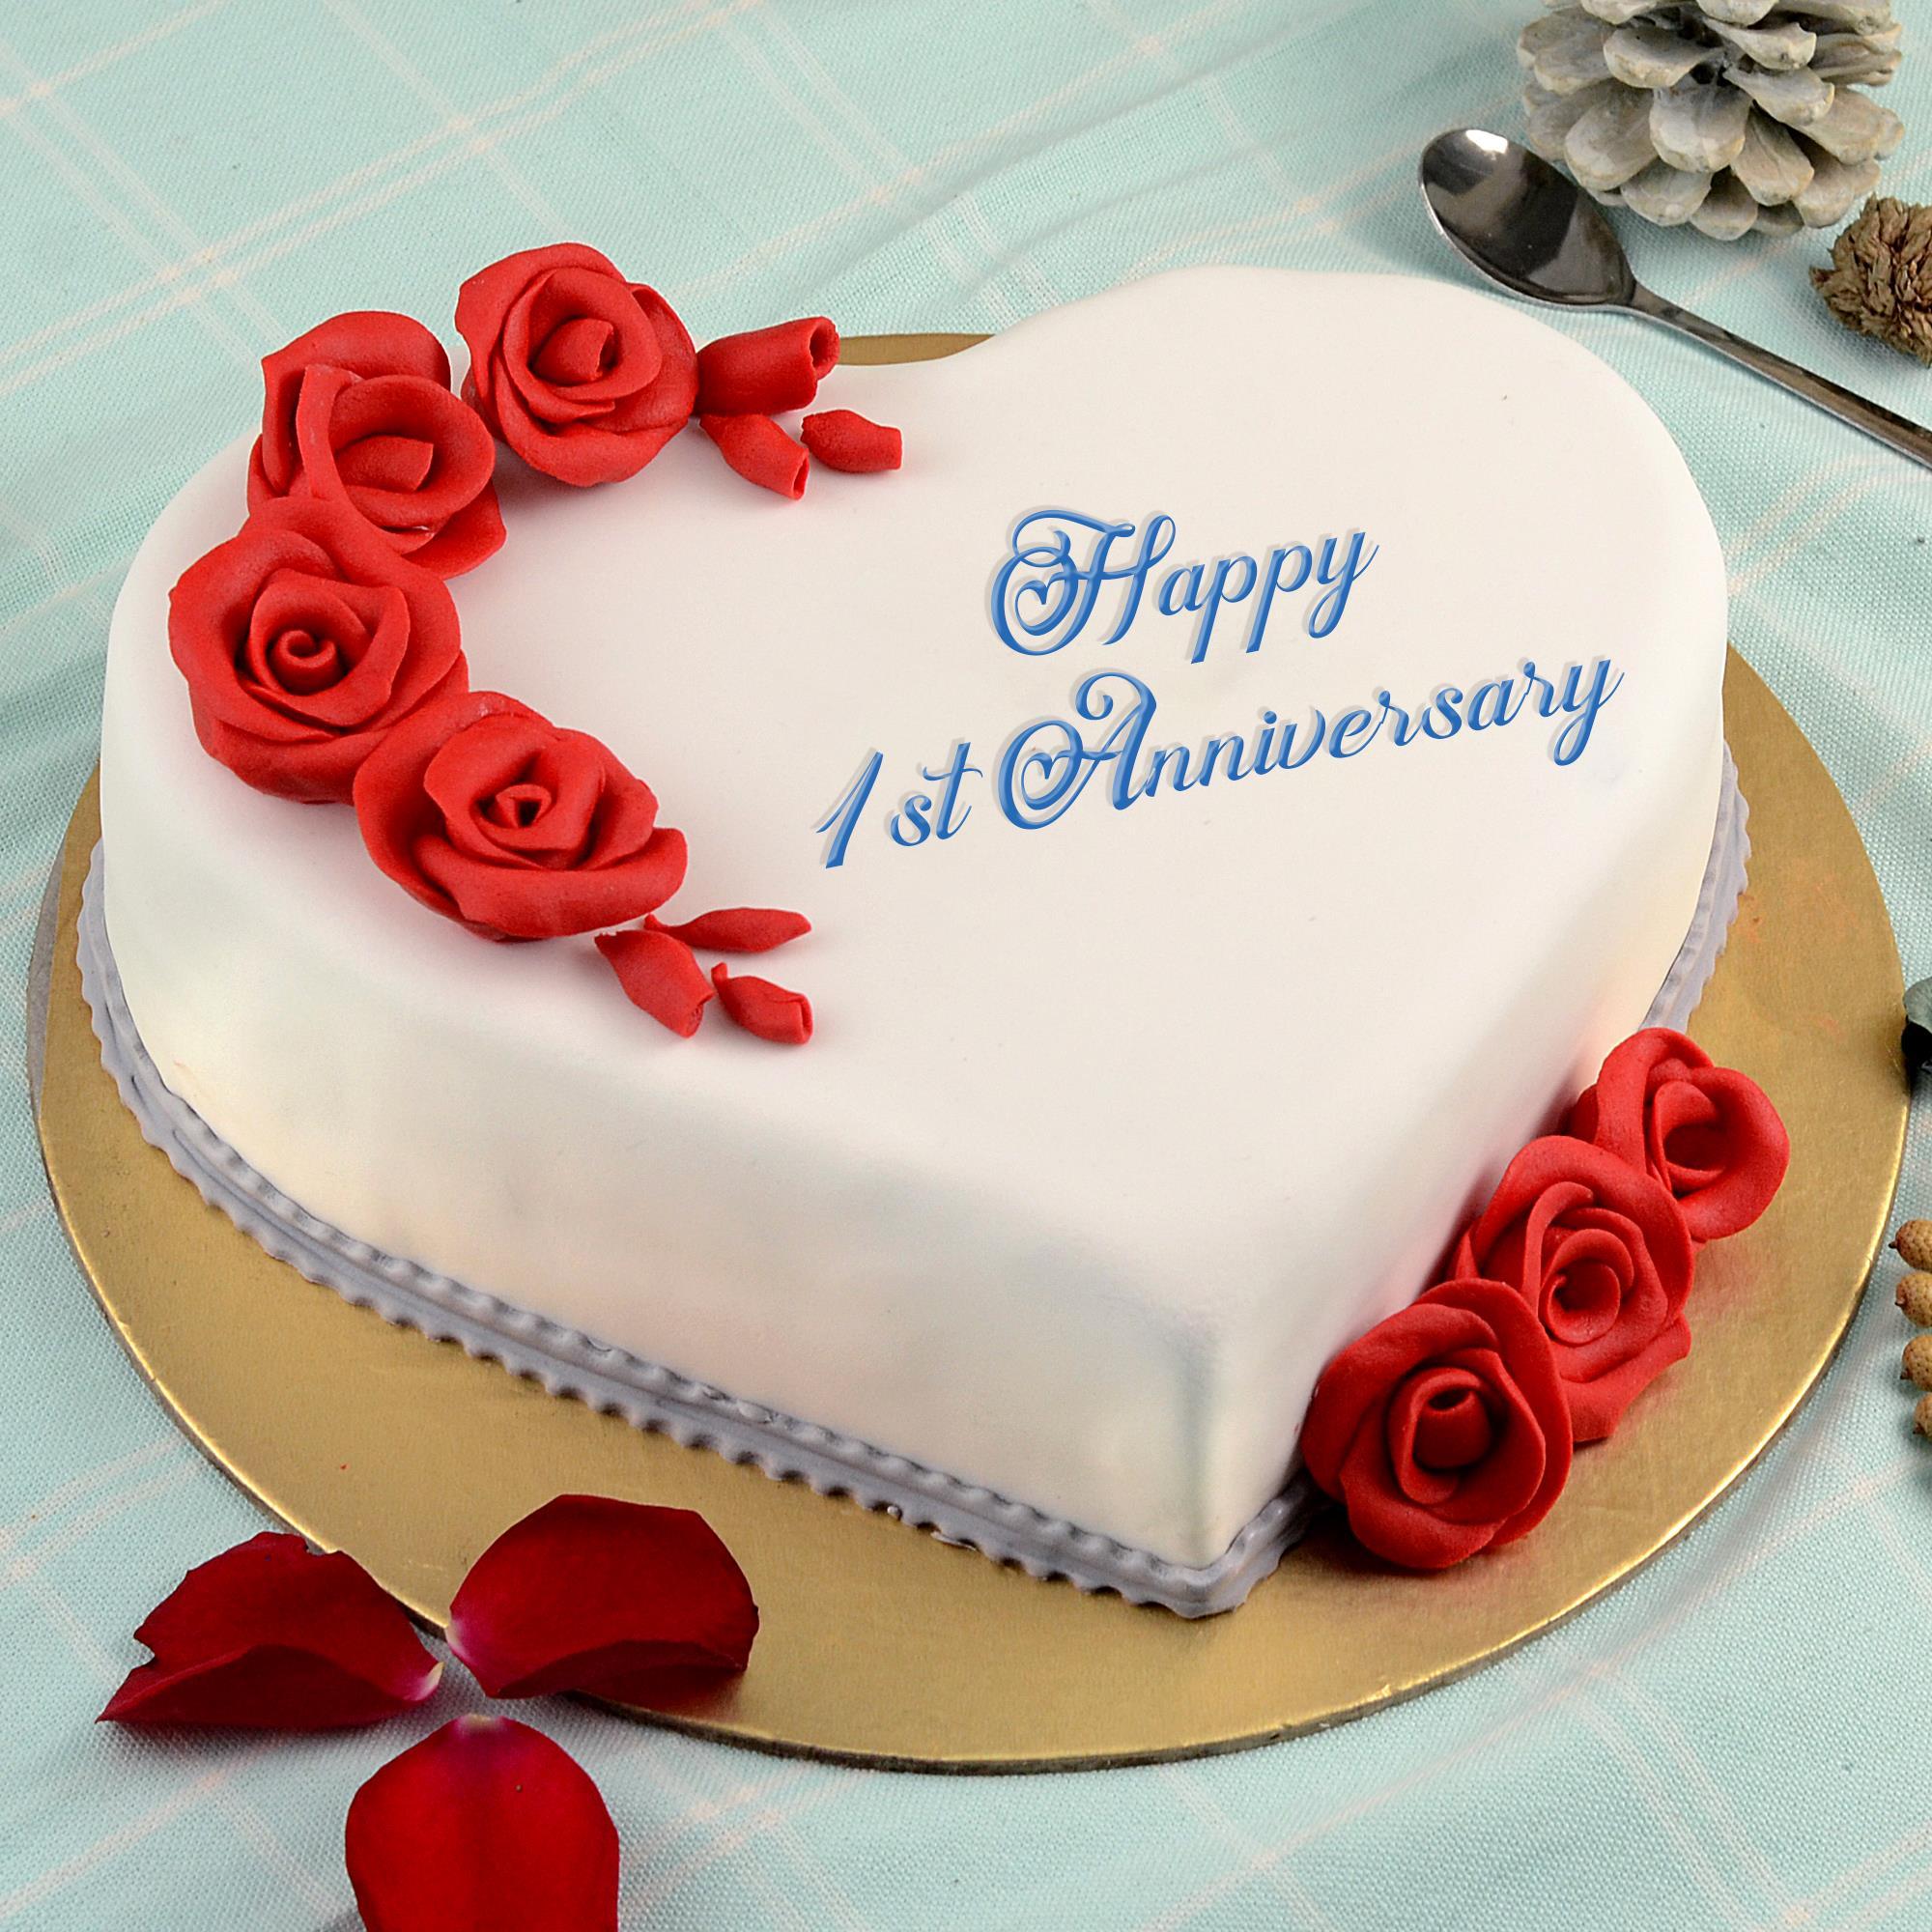 Share more than 83 1st happy anniversary cake latest - in.daotaonec